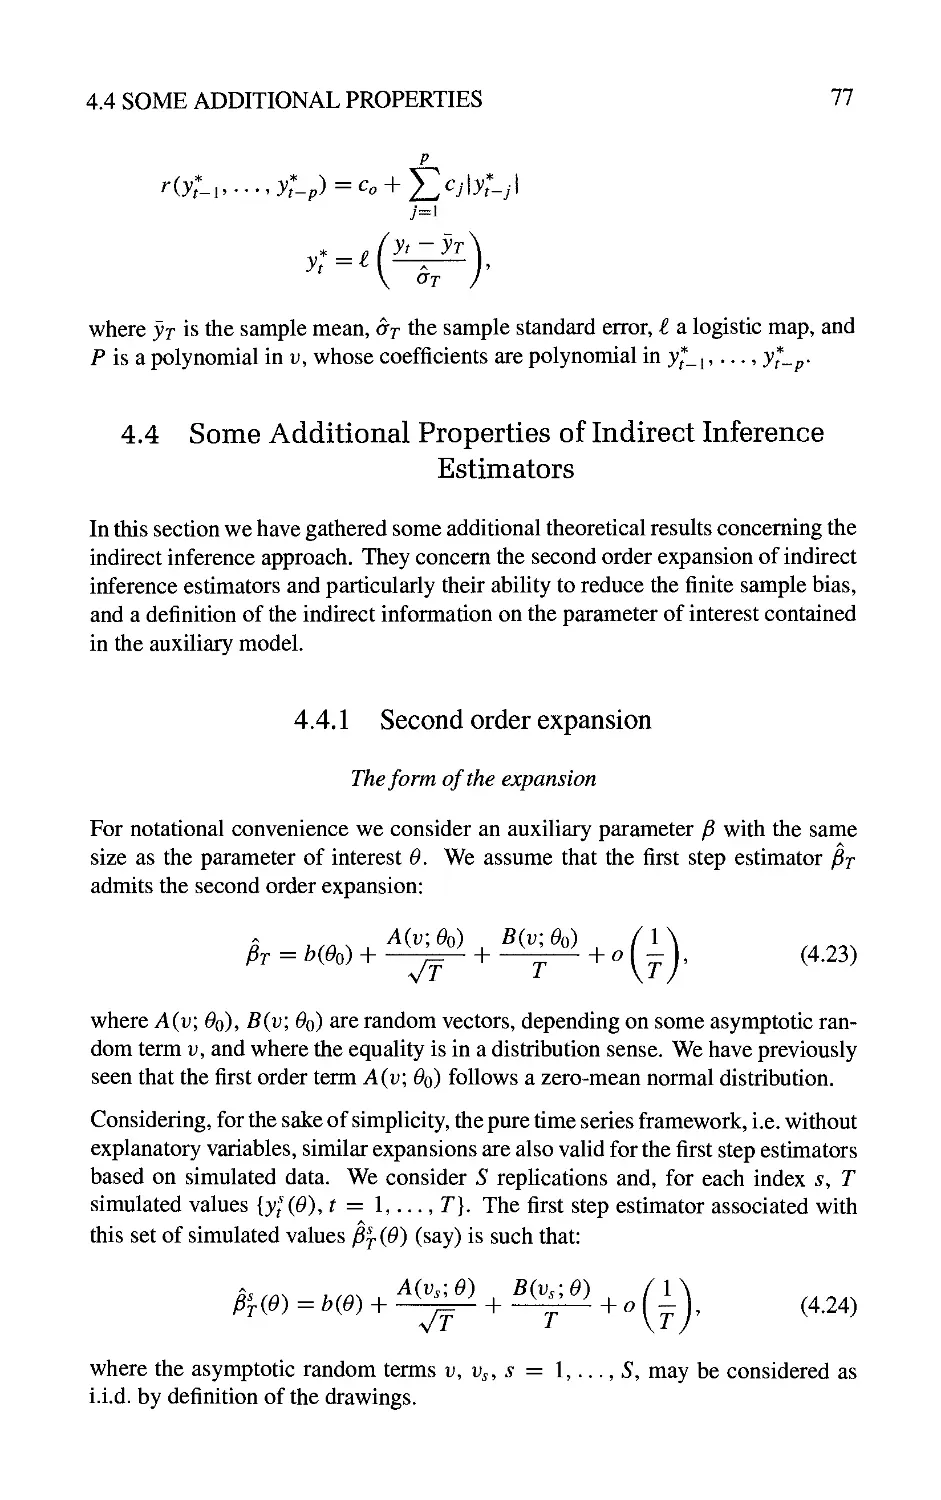 4.4 Some Additional Properties of Indirect Inference Estimators